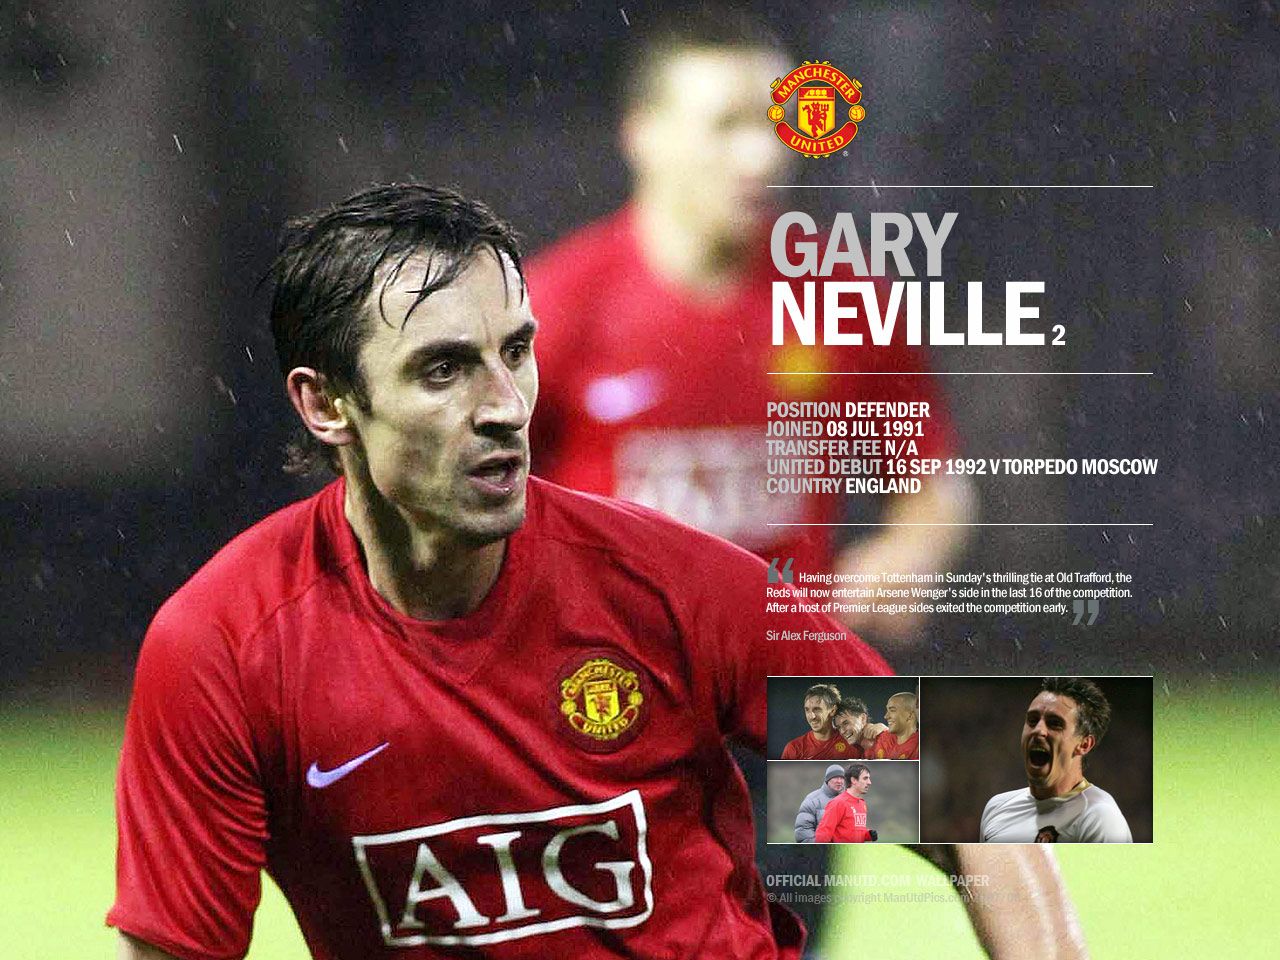 Manchester United Wallpaper For Android Gary Neville Wallpaper 2011